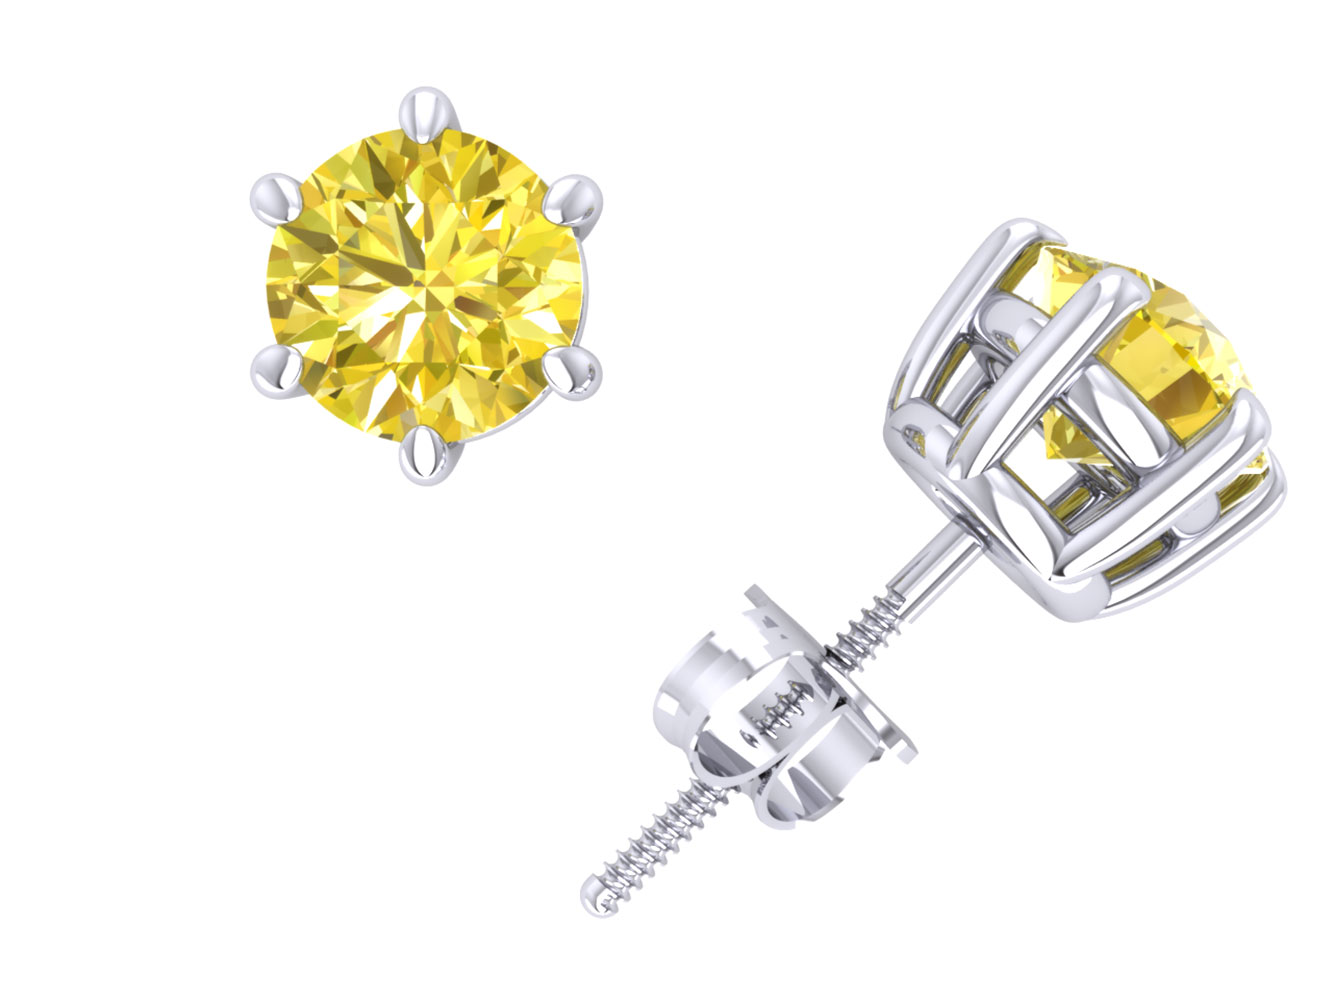 Jewel We Sell 1.50Ct Round Cut Yellow Diamond Basket Solitaire Stud Earrings 14k White or Yellow Gold Prong I1